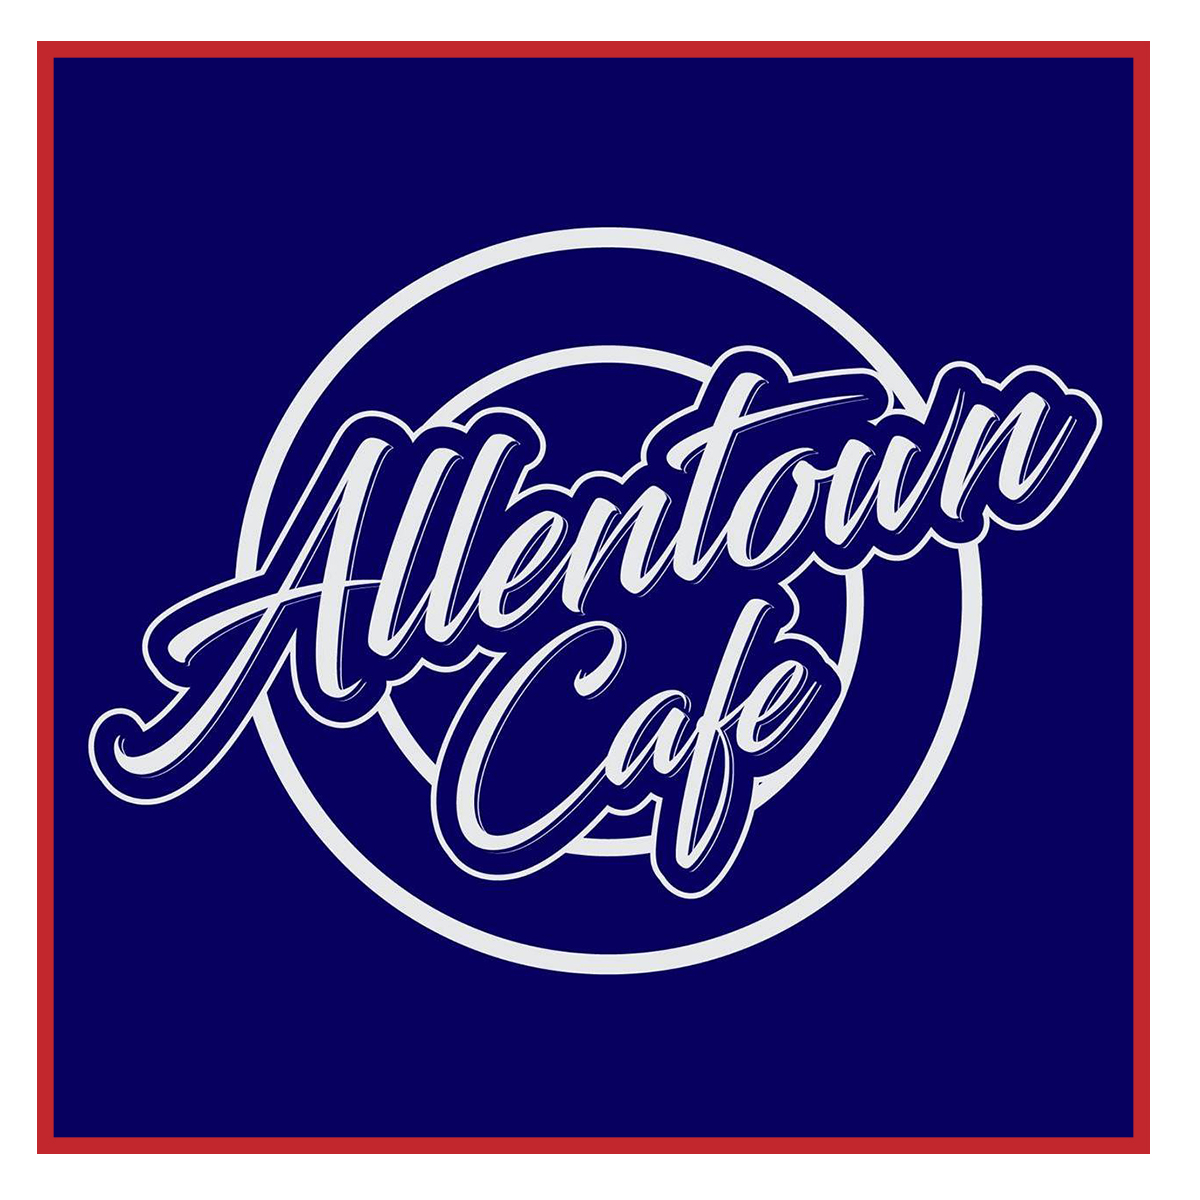 Read more about the article Allentown Cafe